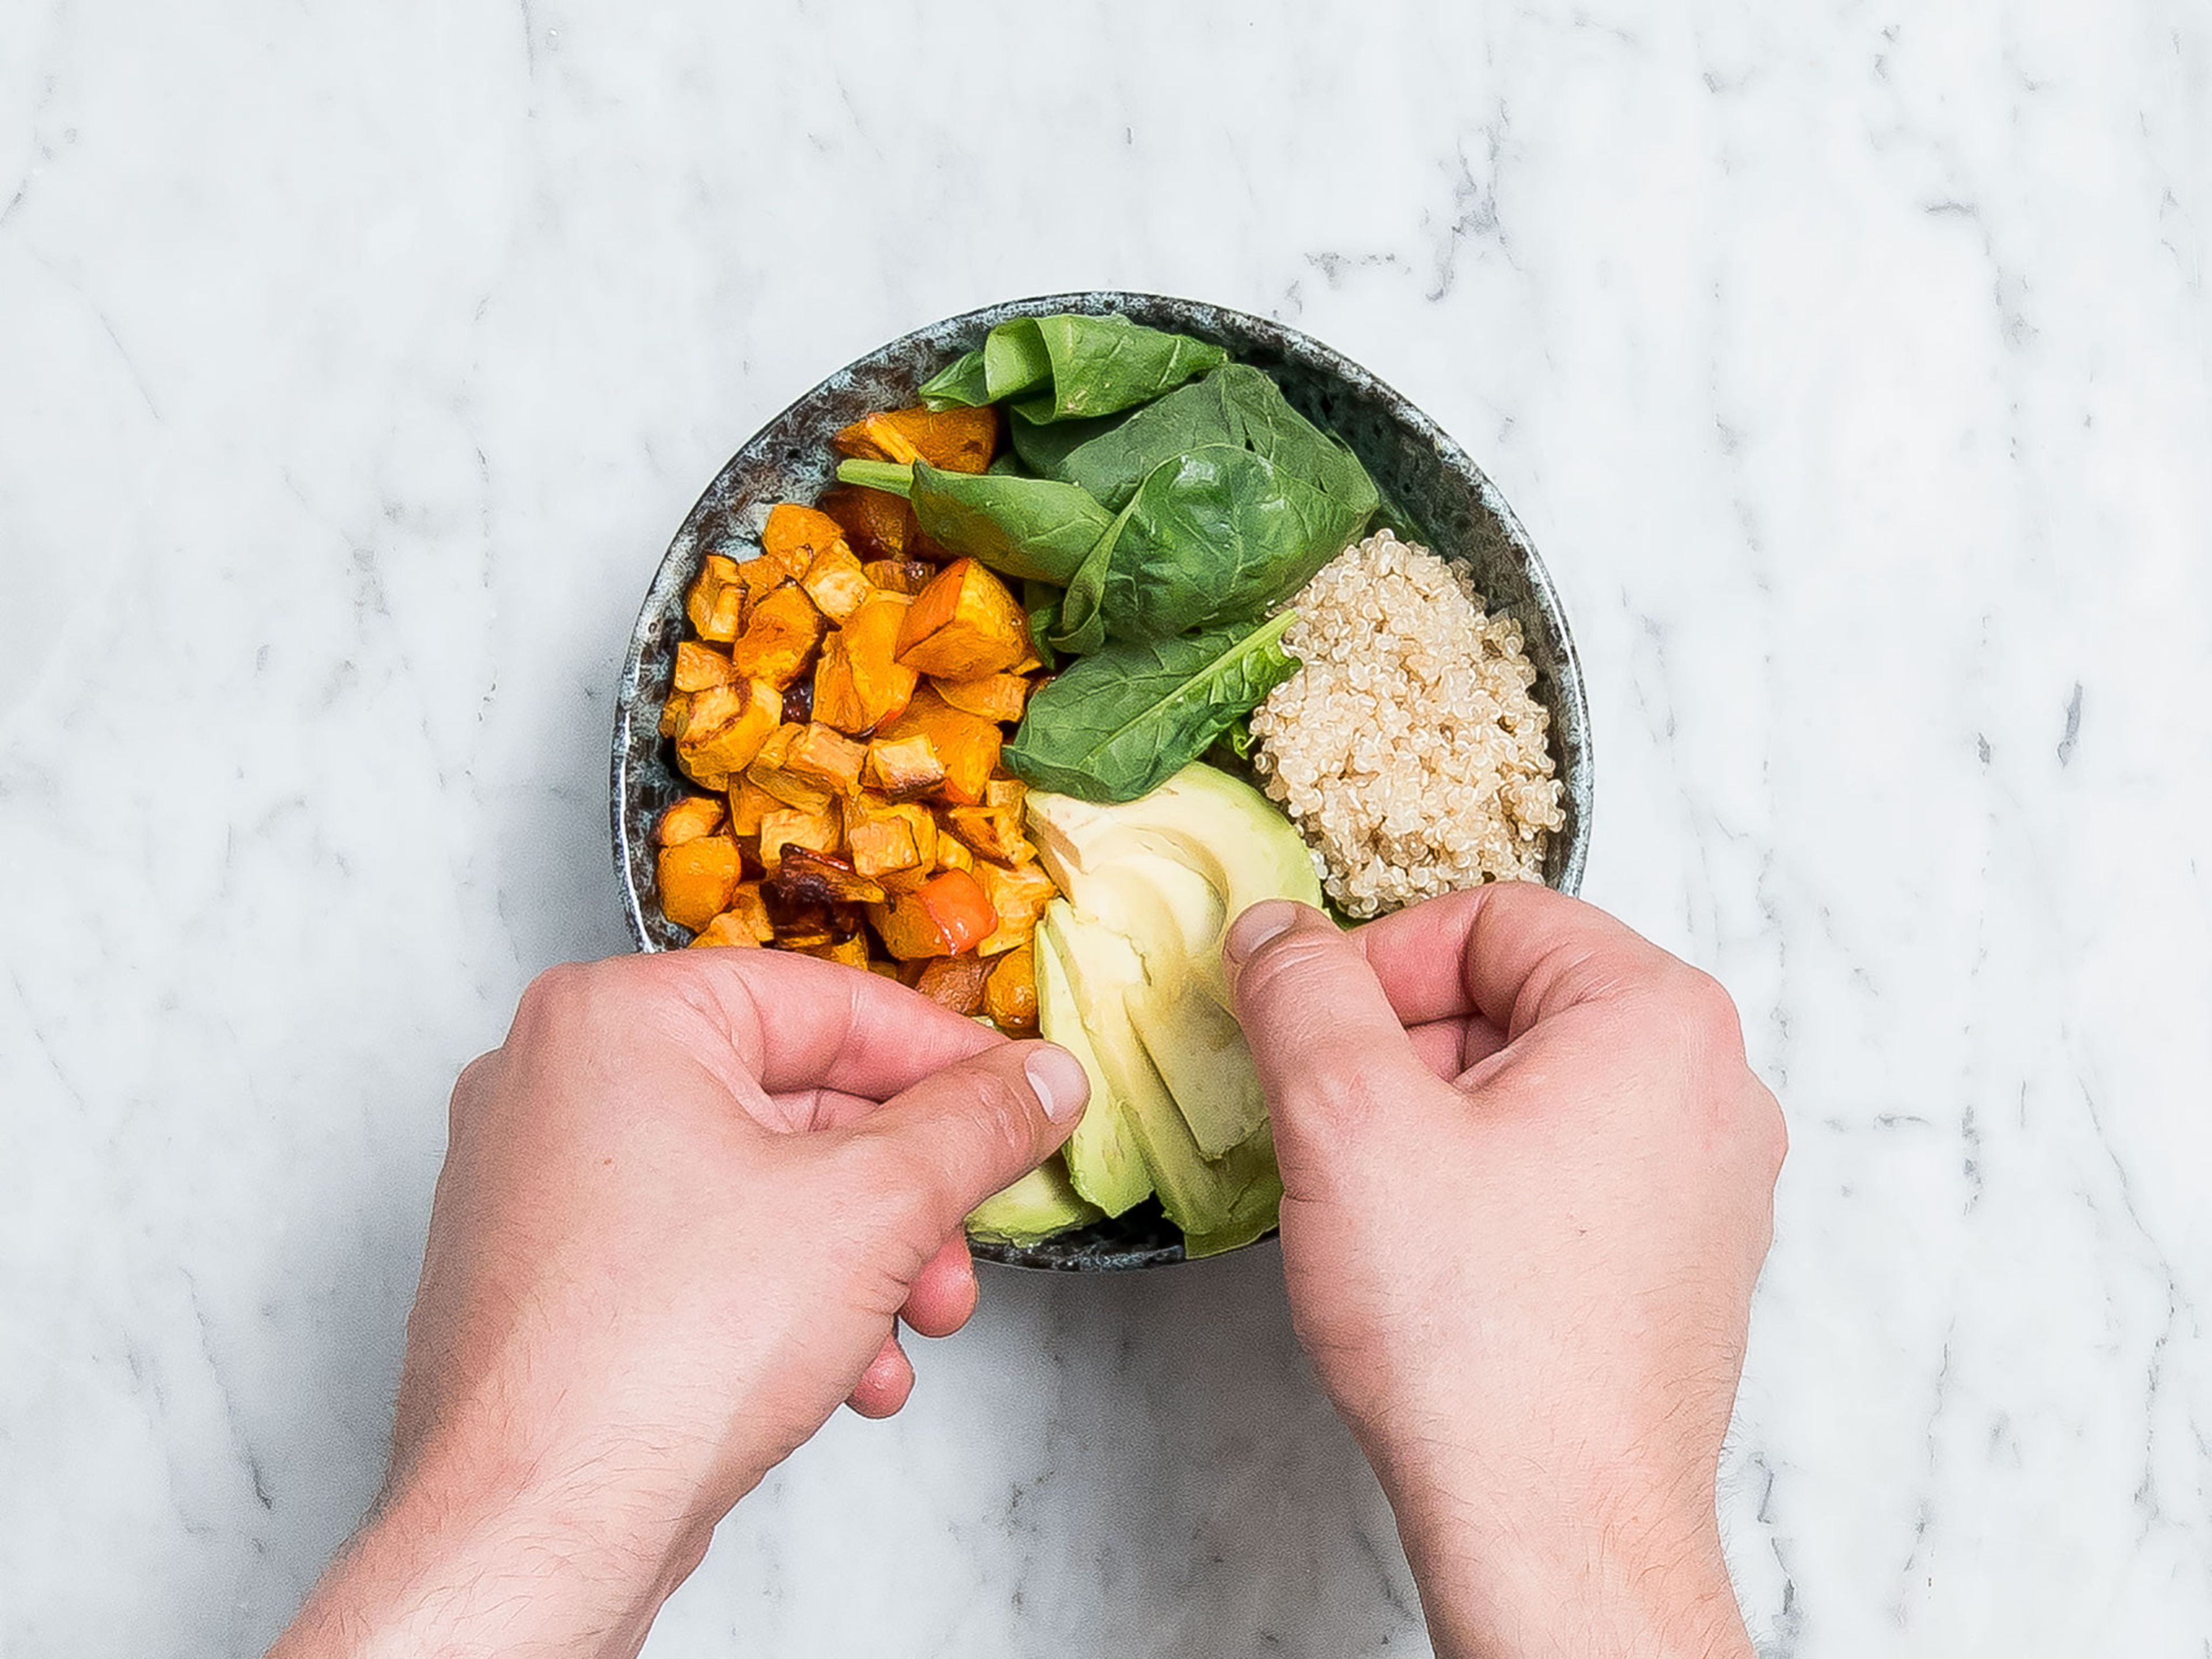 Wash and dry baby spinach. Halve, pit and slice avocado. Serve spinach, cooked quinoa, pumpkin and sweet potato, avocado, and pepper-orange topping to a serving bowl. Enjoy!